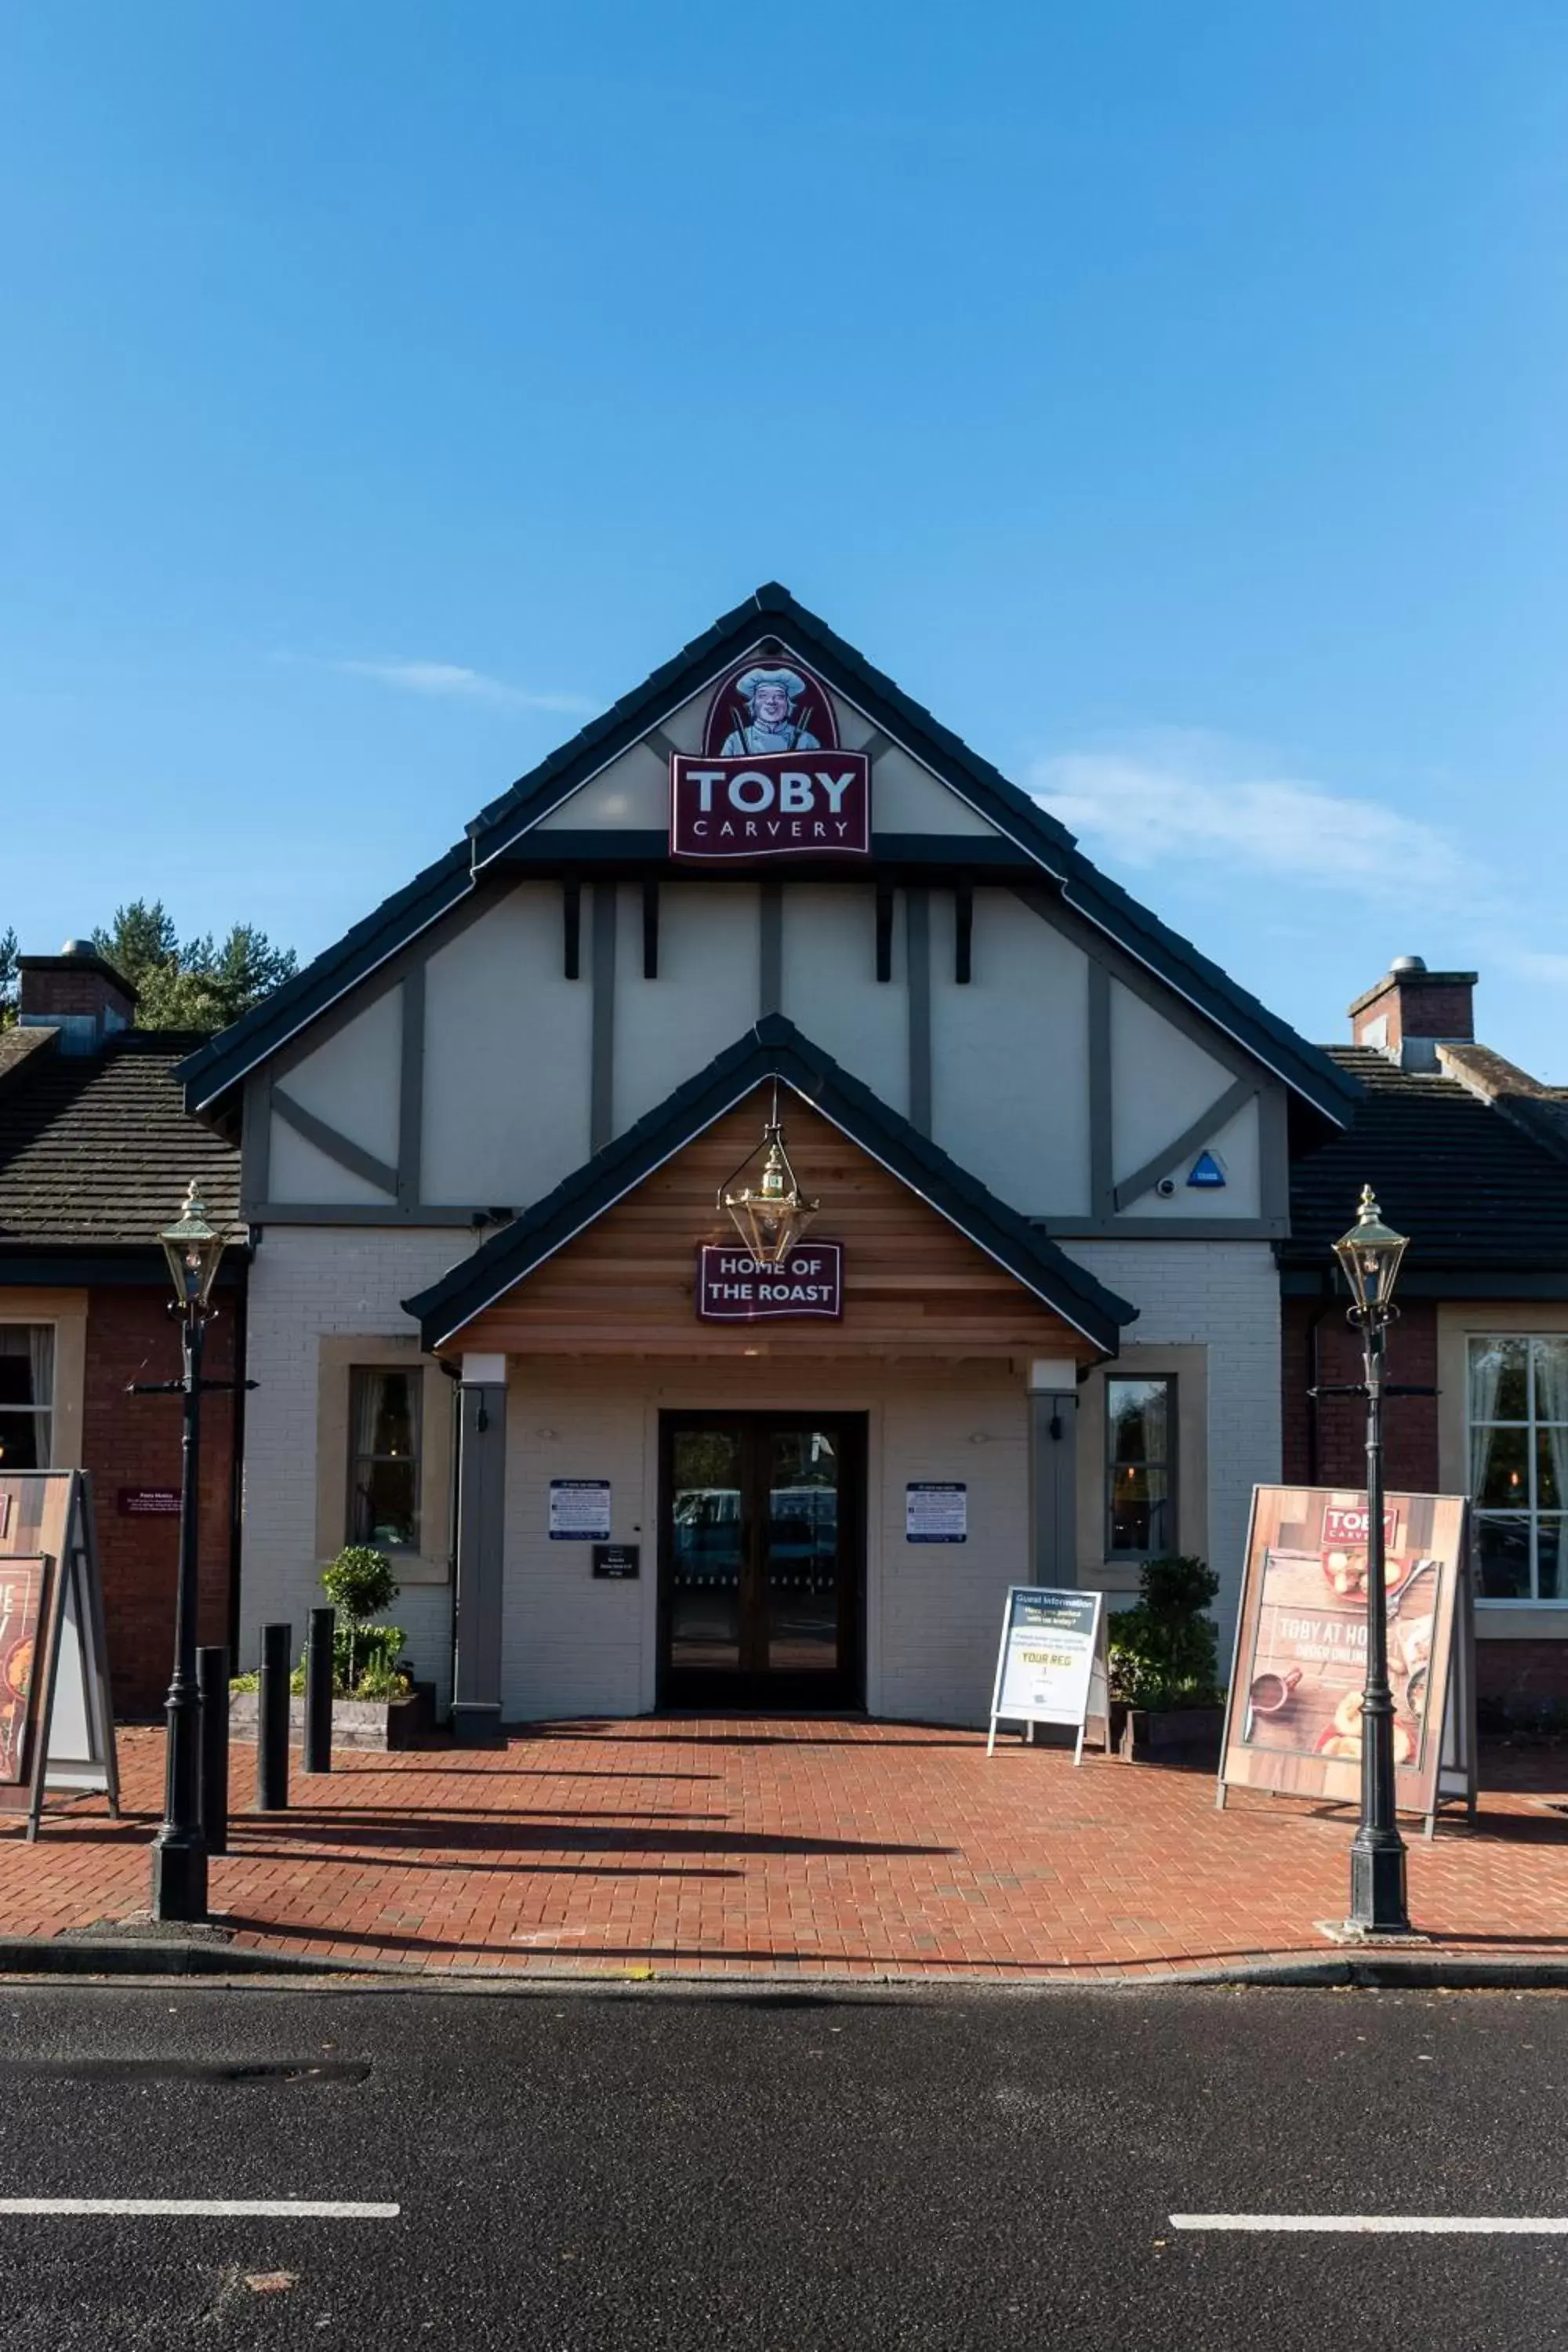 Property Building in Toby Carvery Strathclyde, M74 J6 by Innkeeper's Collection